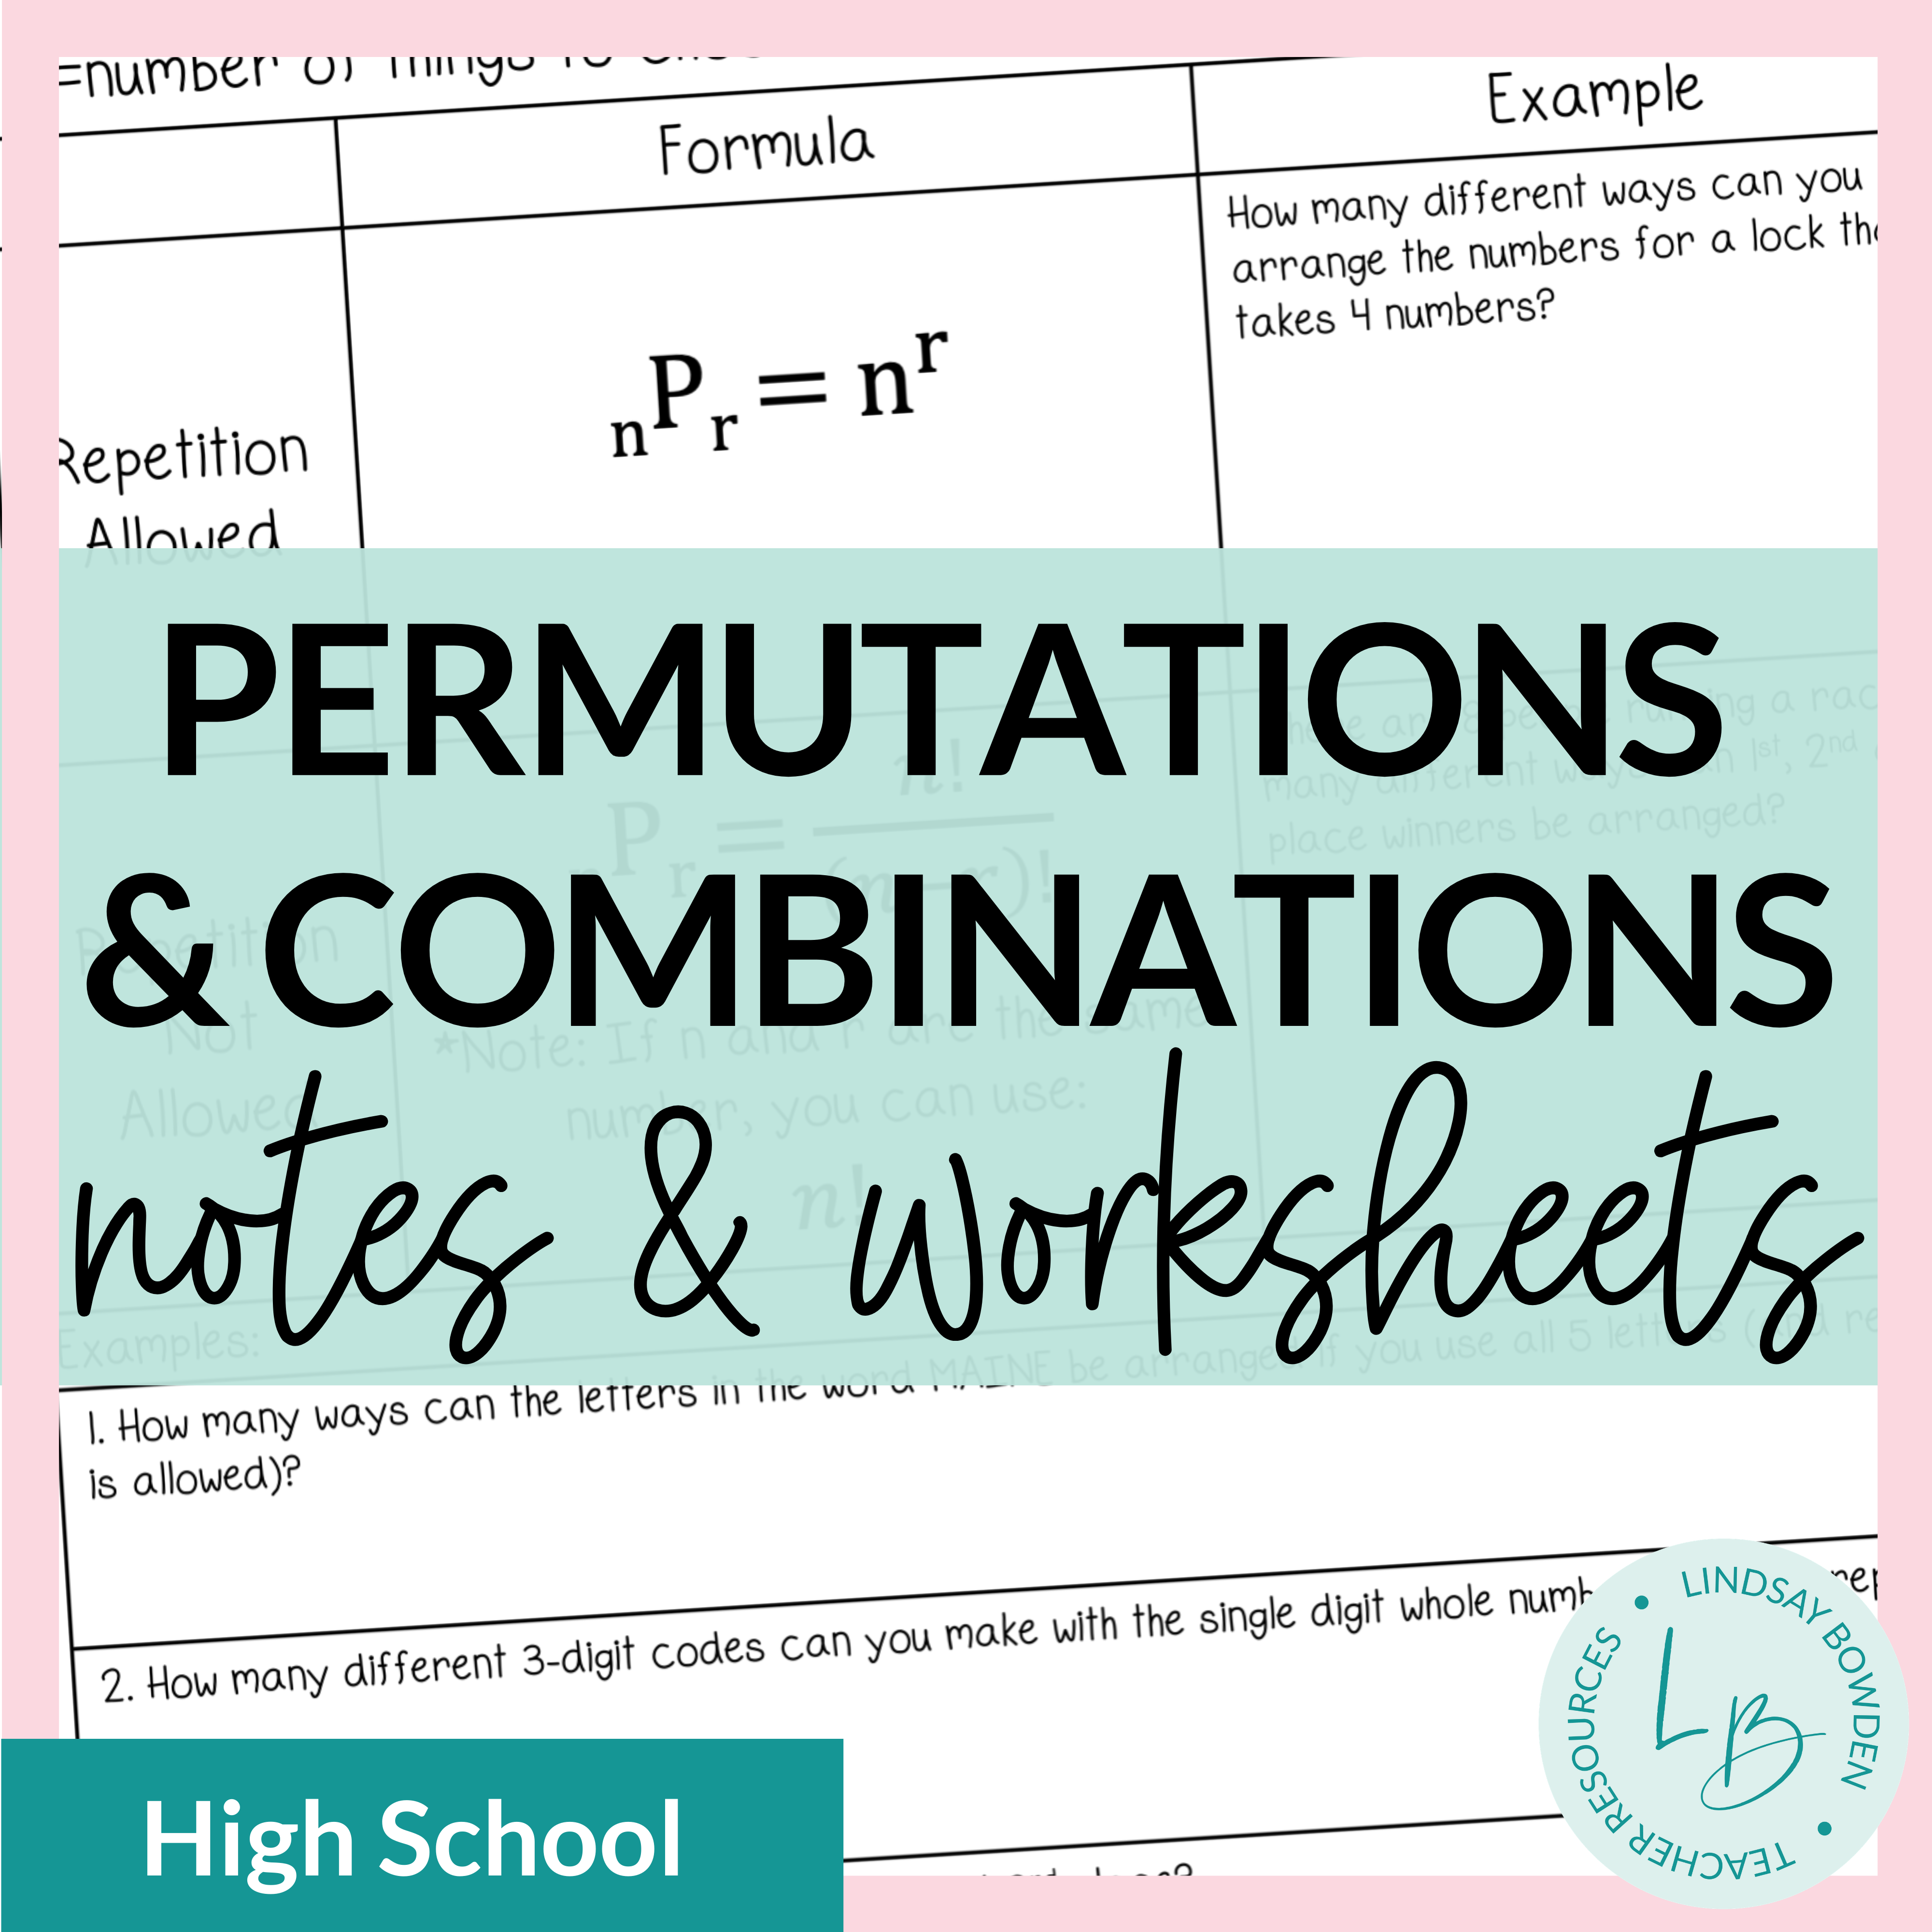 Permutations and Combinations Notes and Worksheets - Lindsay Bowden Pertaining To Permutations And Combinations Worksheet